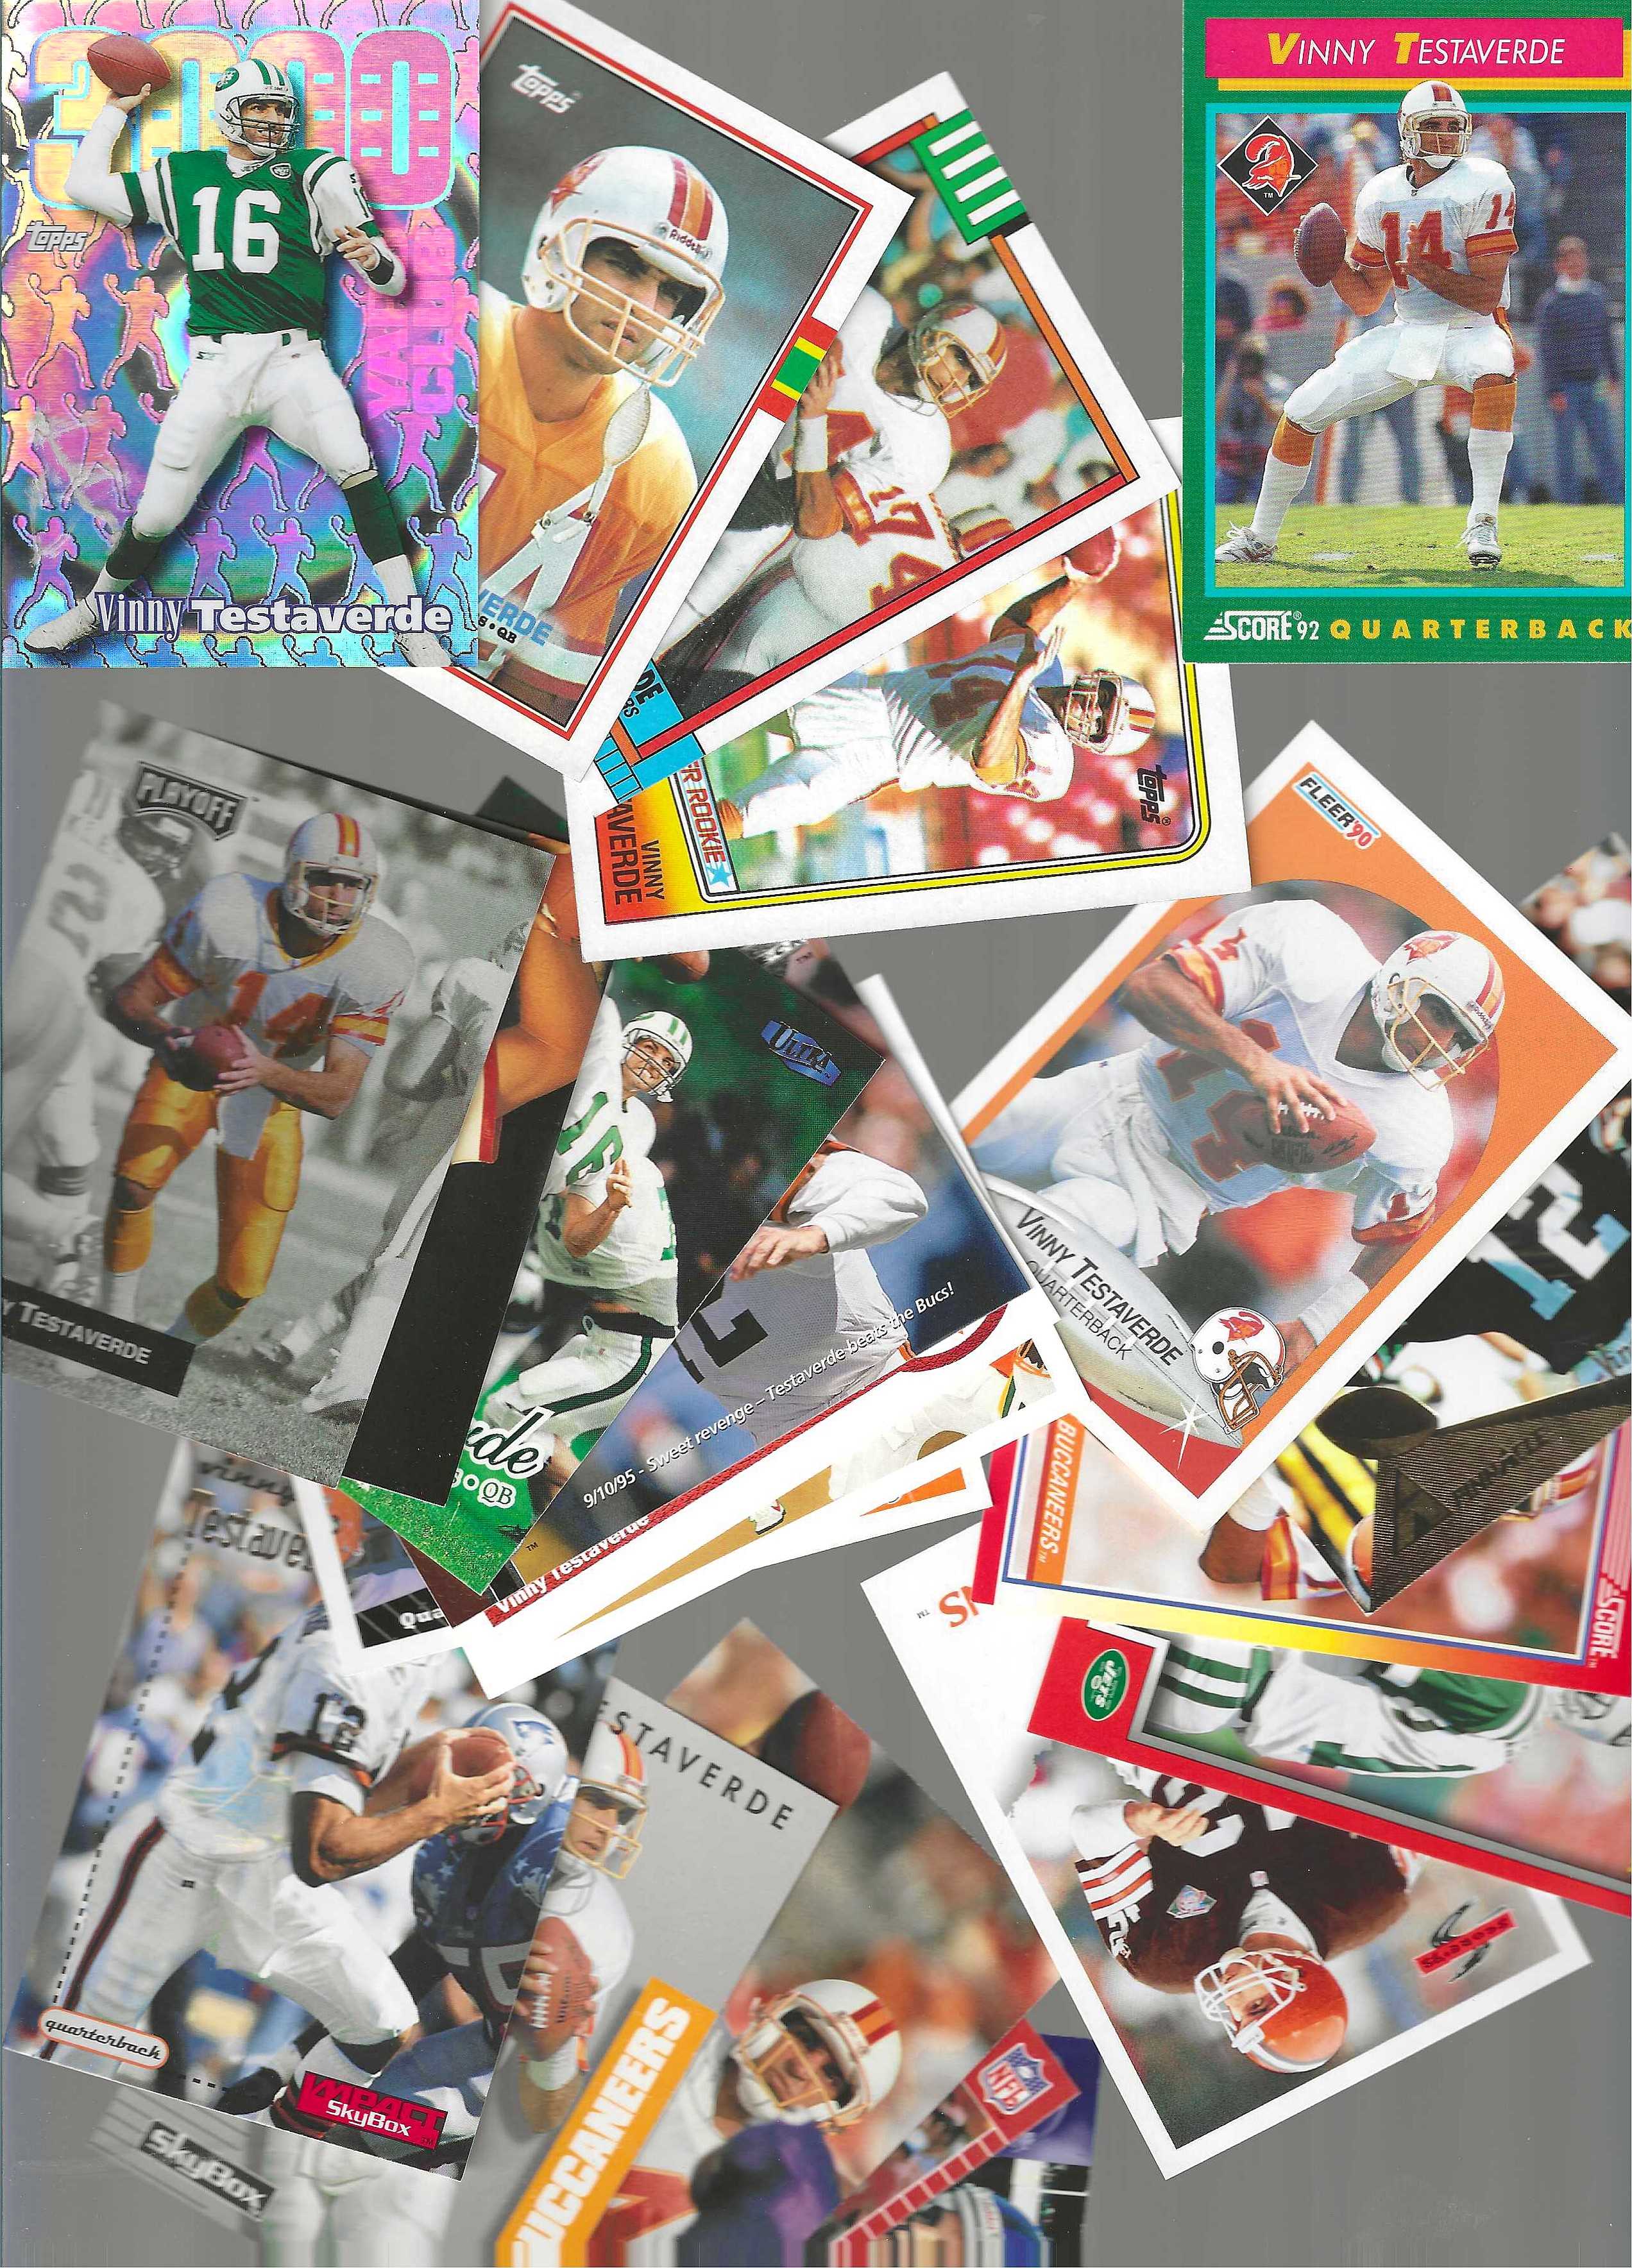 Vinny Testaverde *** COLLECTION *** 1988-1999 - Lot (36) diff. + (12) dups Football cards value